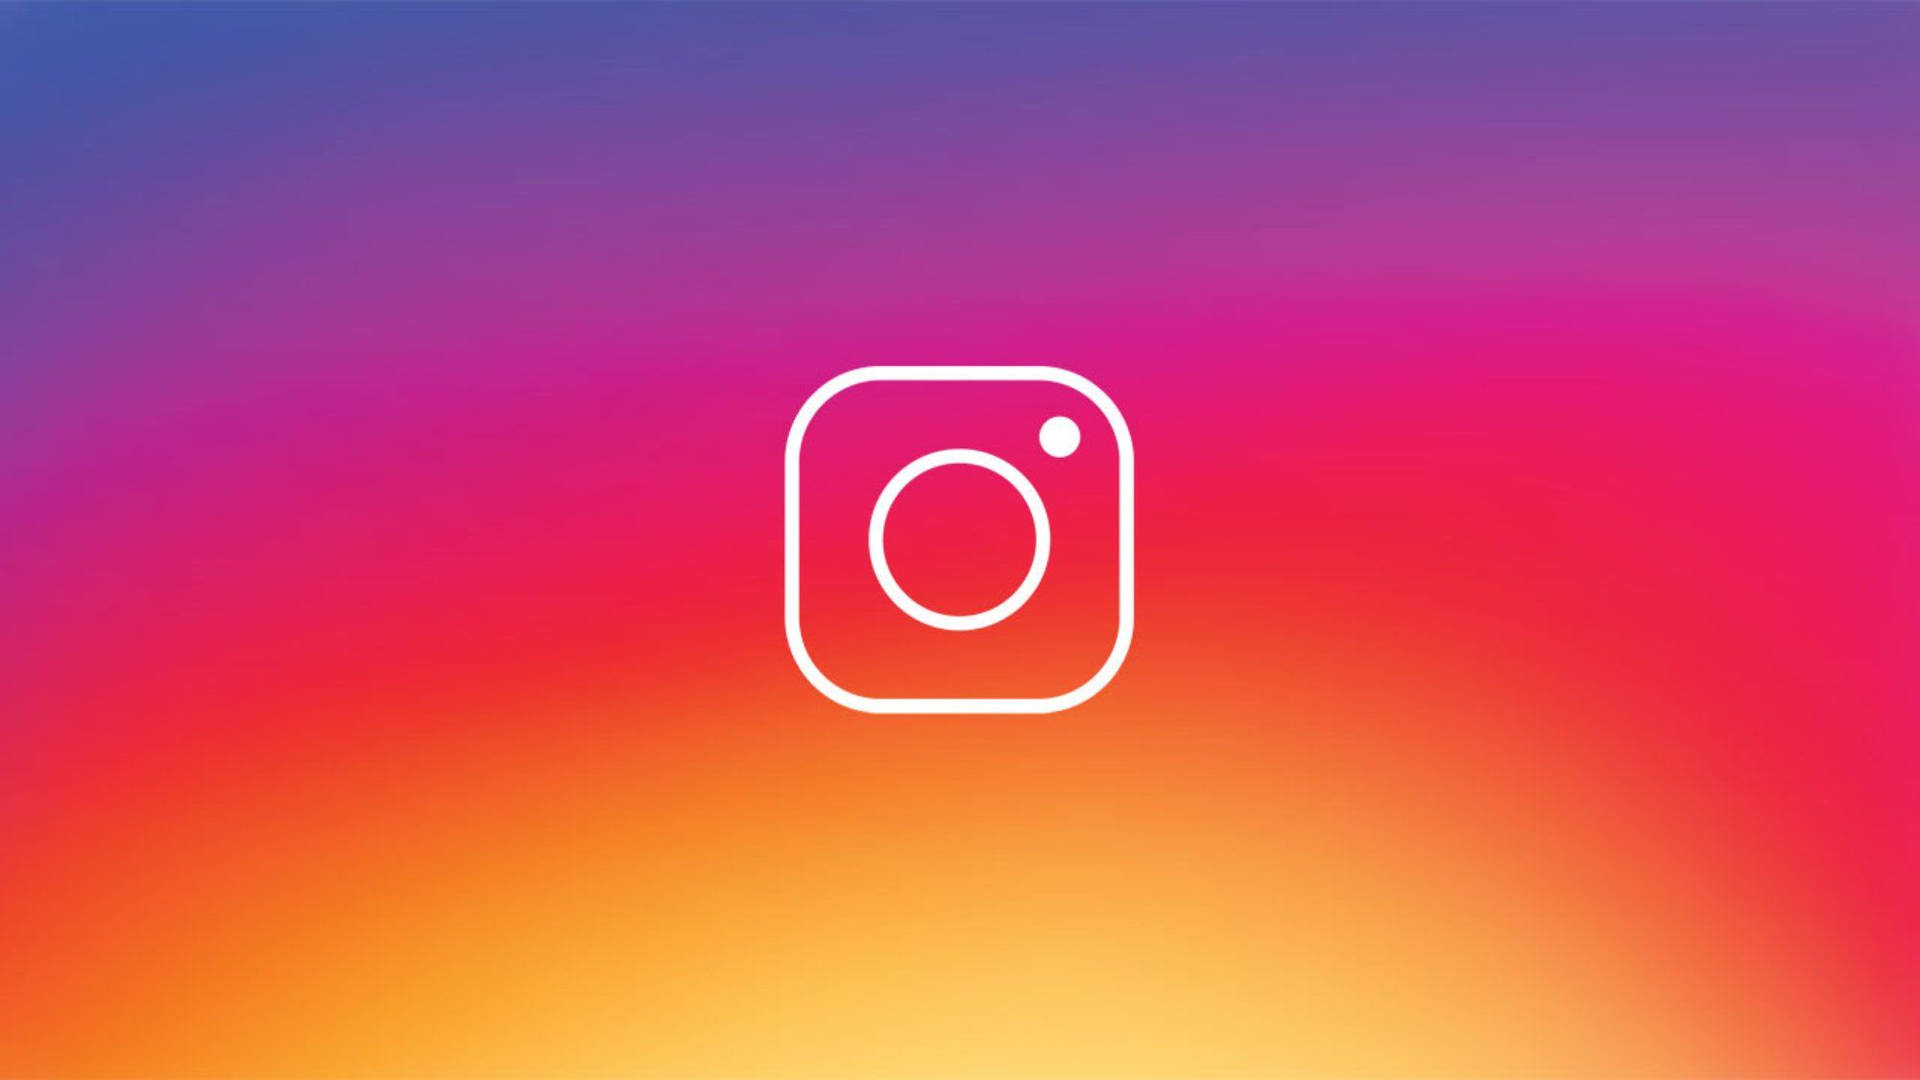 20+ Instagram HD Wallpapers and Backgrounds